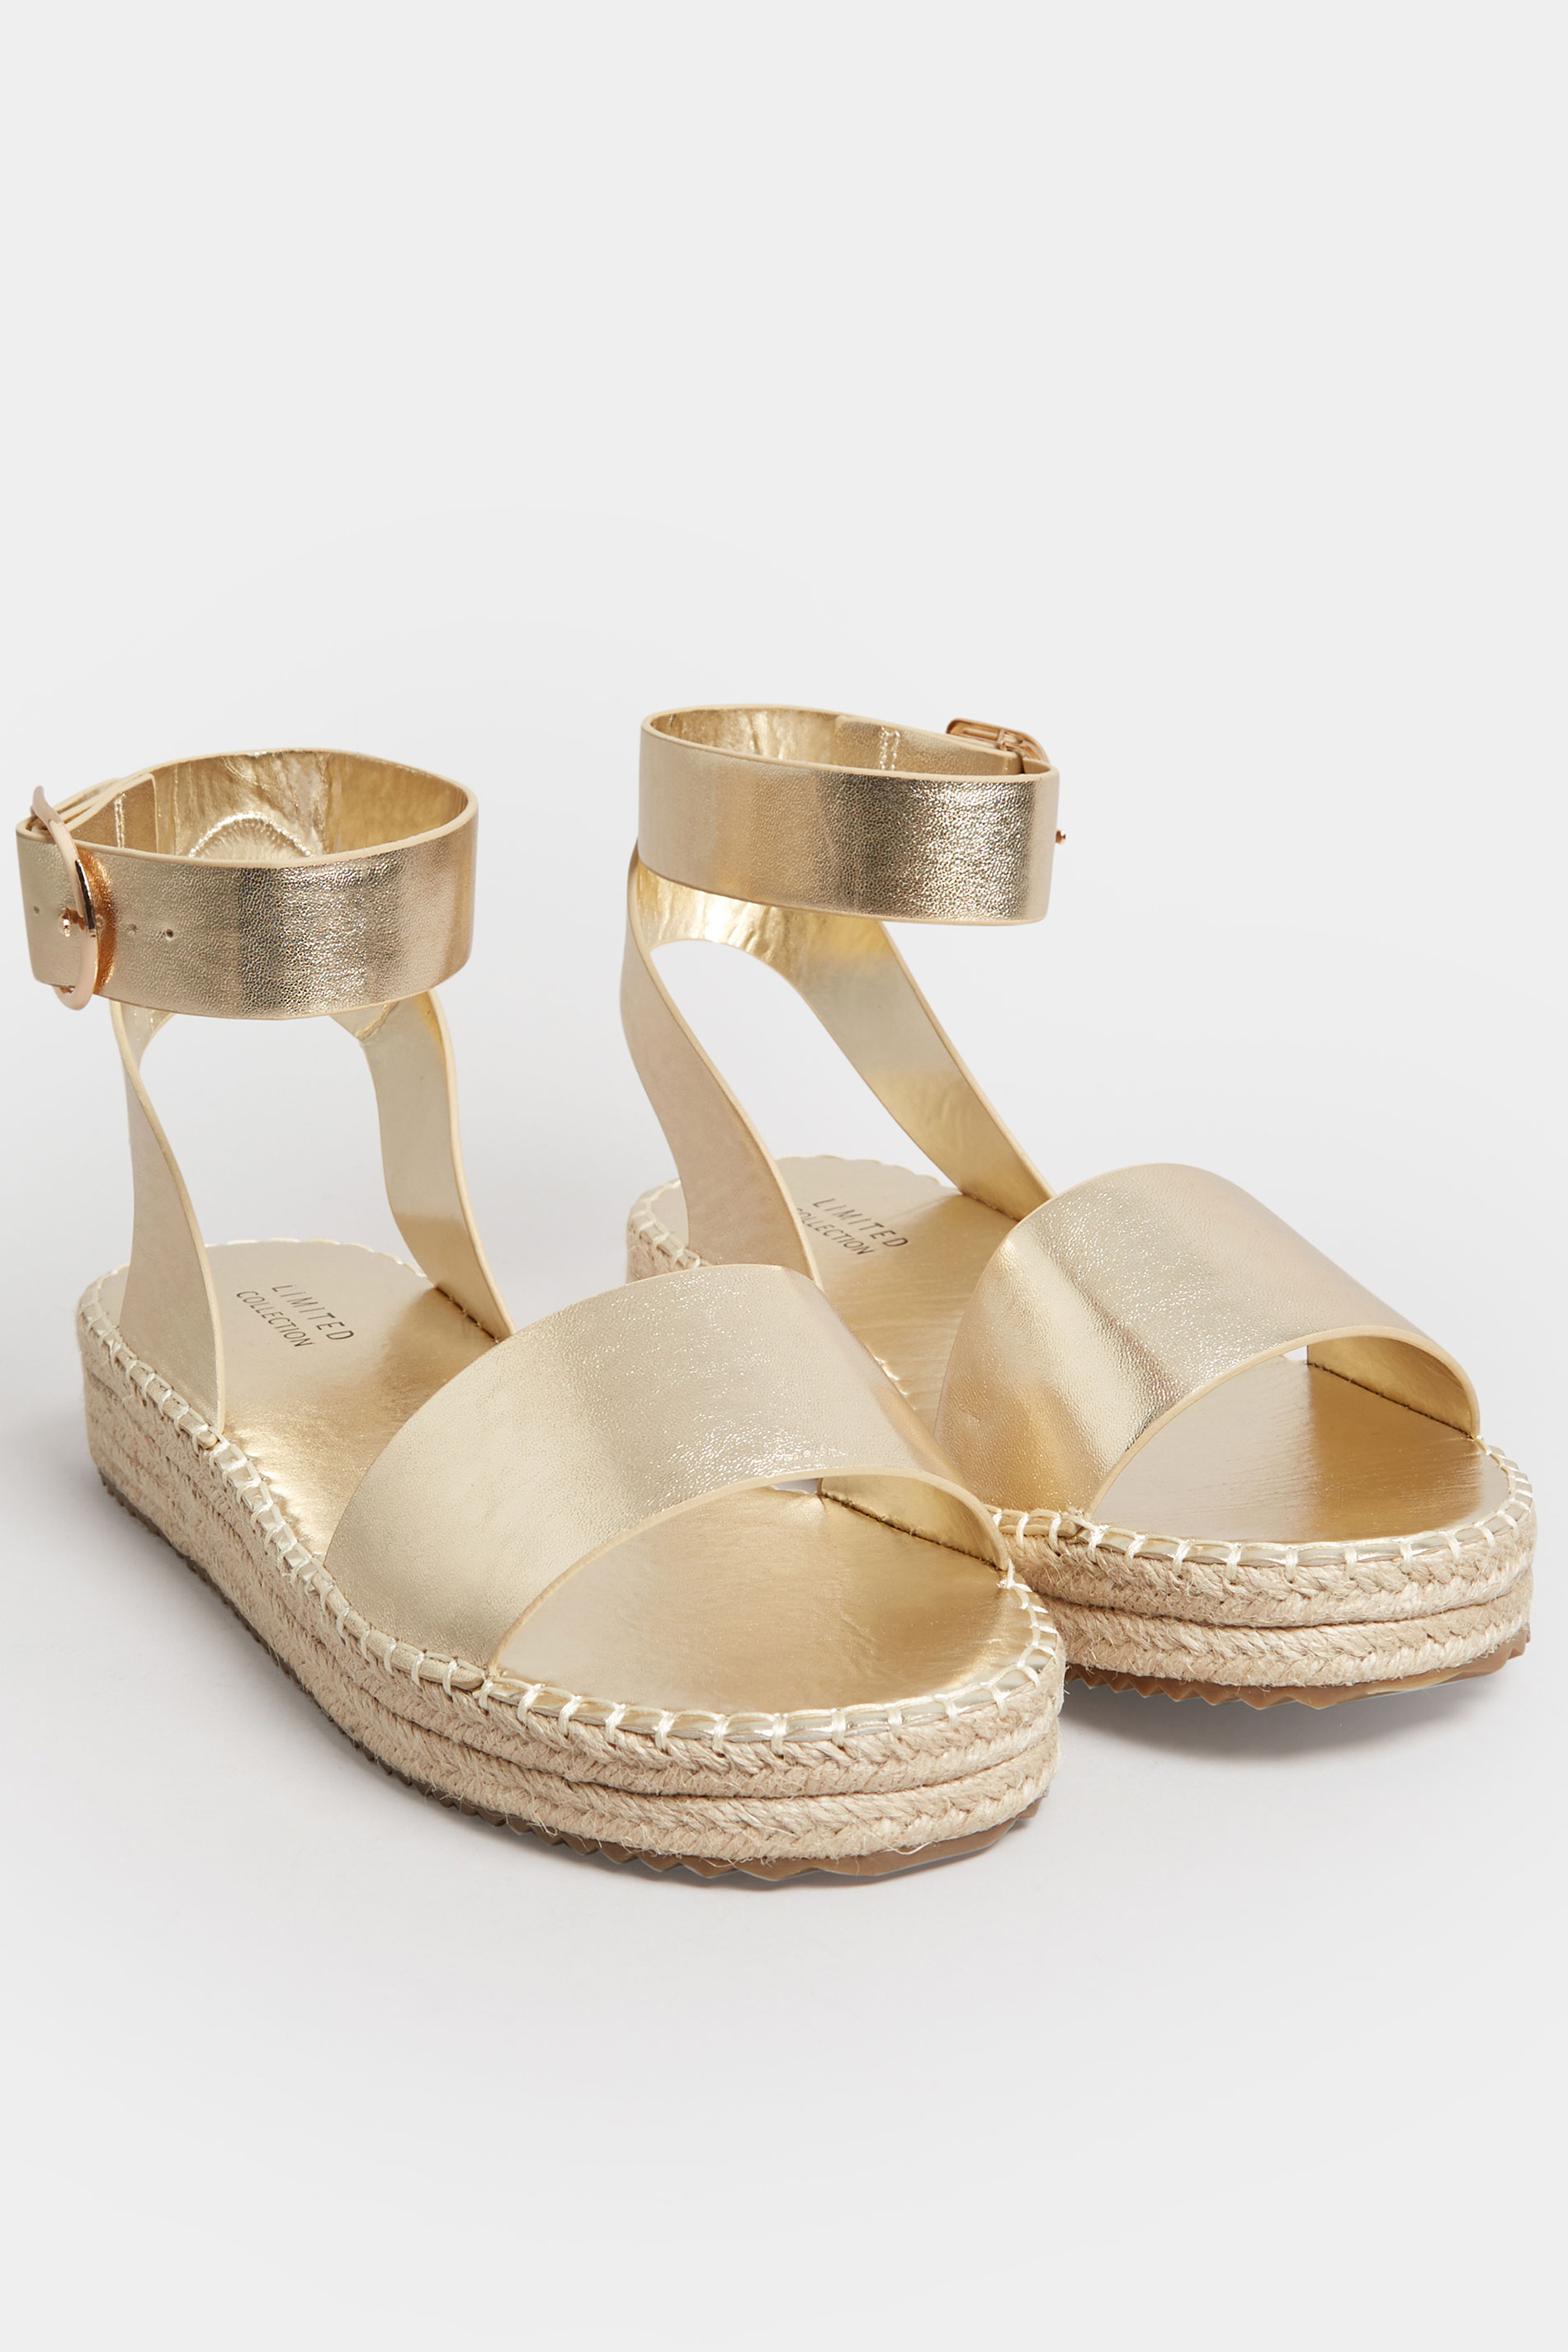 LIMITED COLLECTION Gold Flatform Espadrilles In Extra Wide EEE Fit | Yours Clothing 1